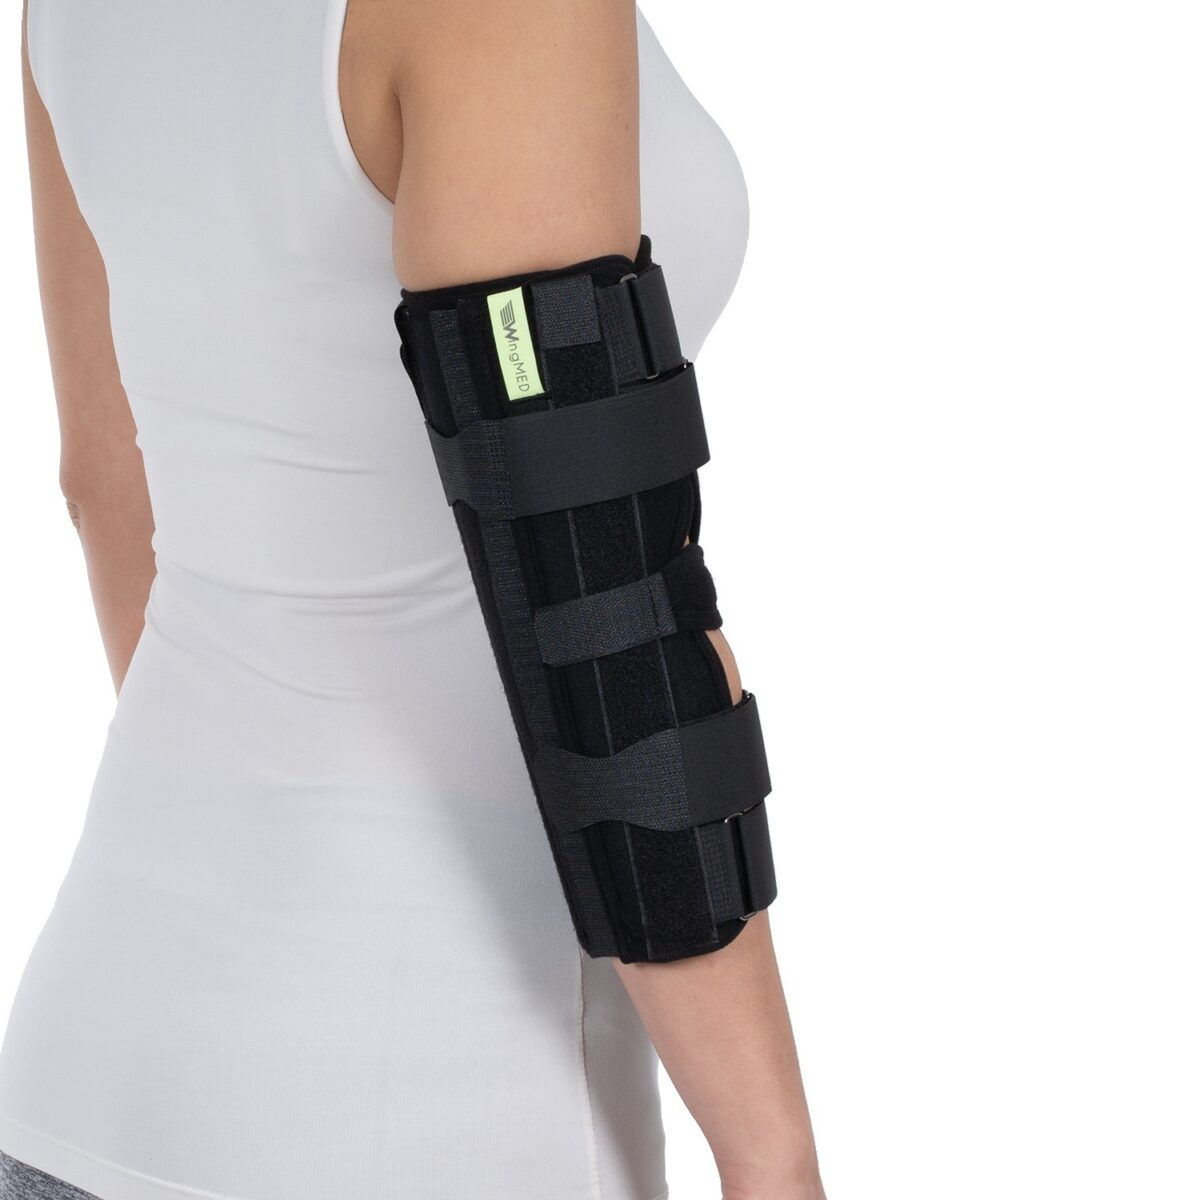 wingmed orthopedic equipments W207 elbow immobilizer 2